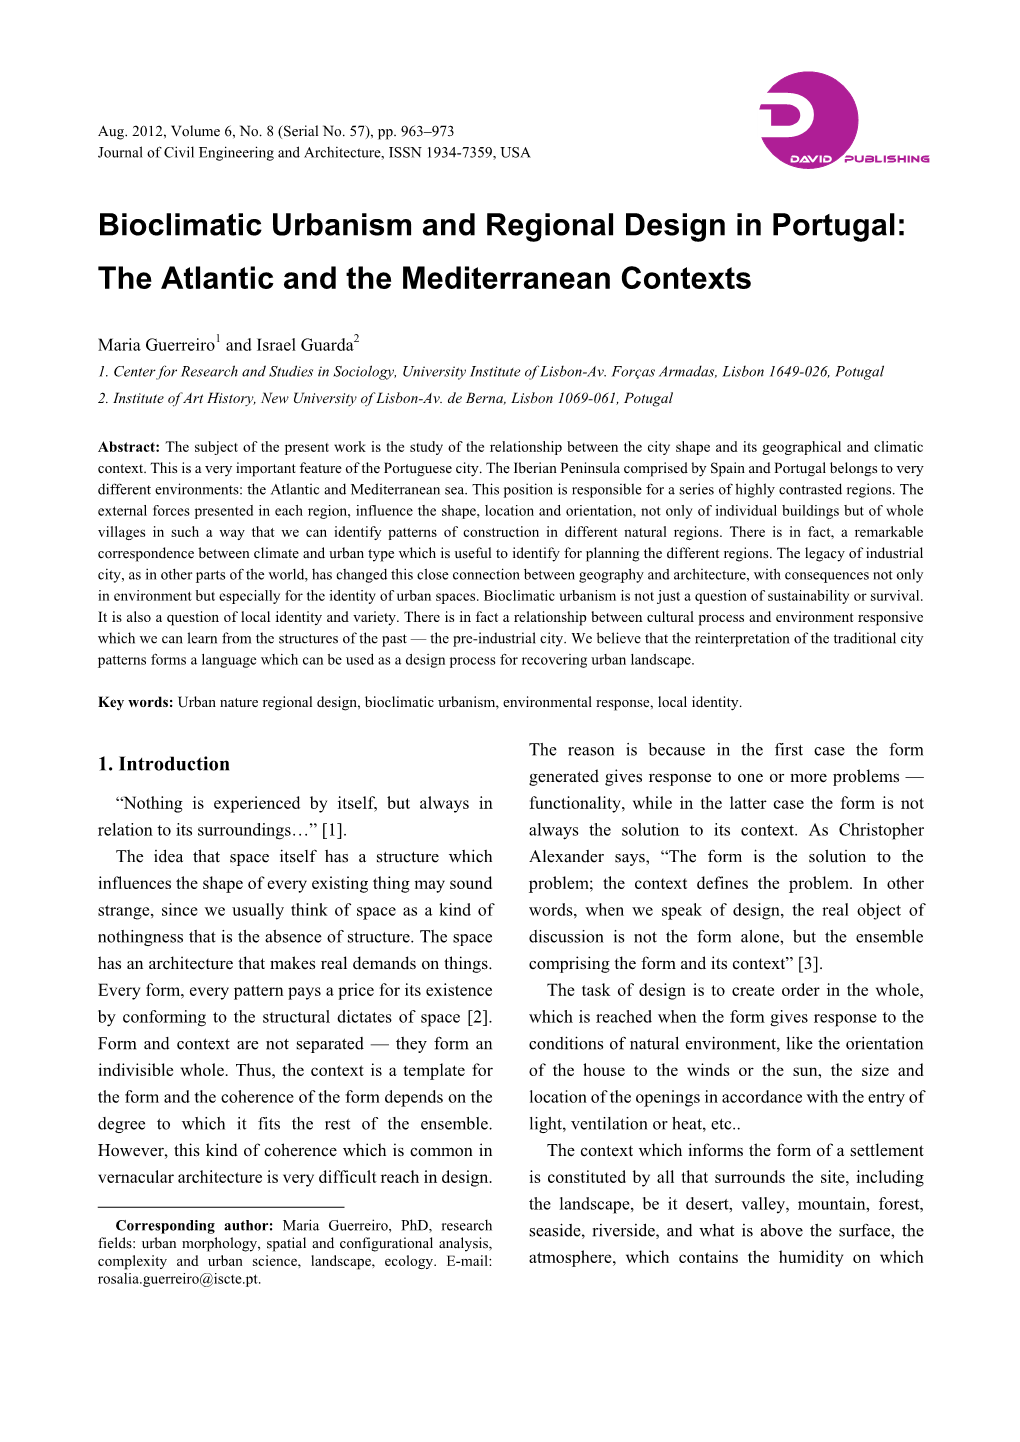 Bioclimatic Urbanism and Regional Design in Portugal: the Atlantic and the Mediterranean Contexts